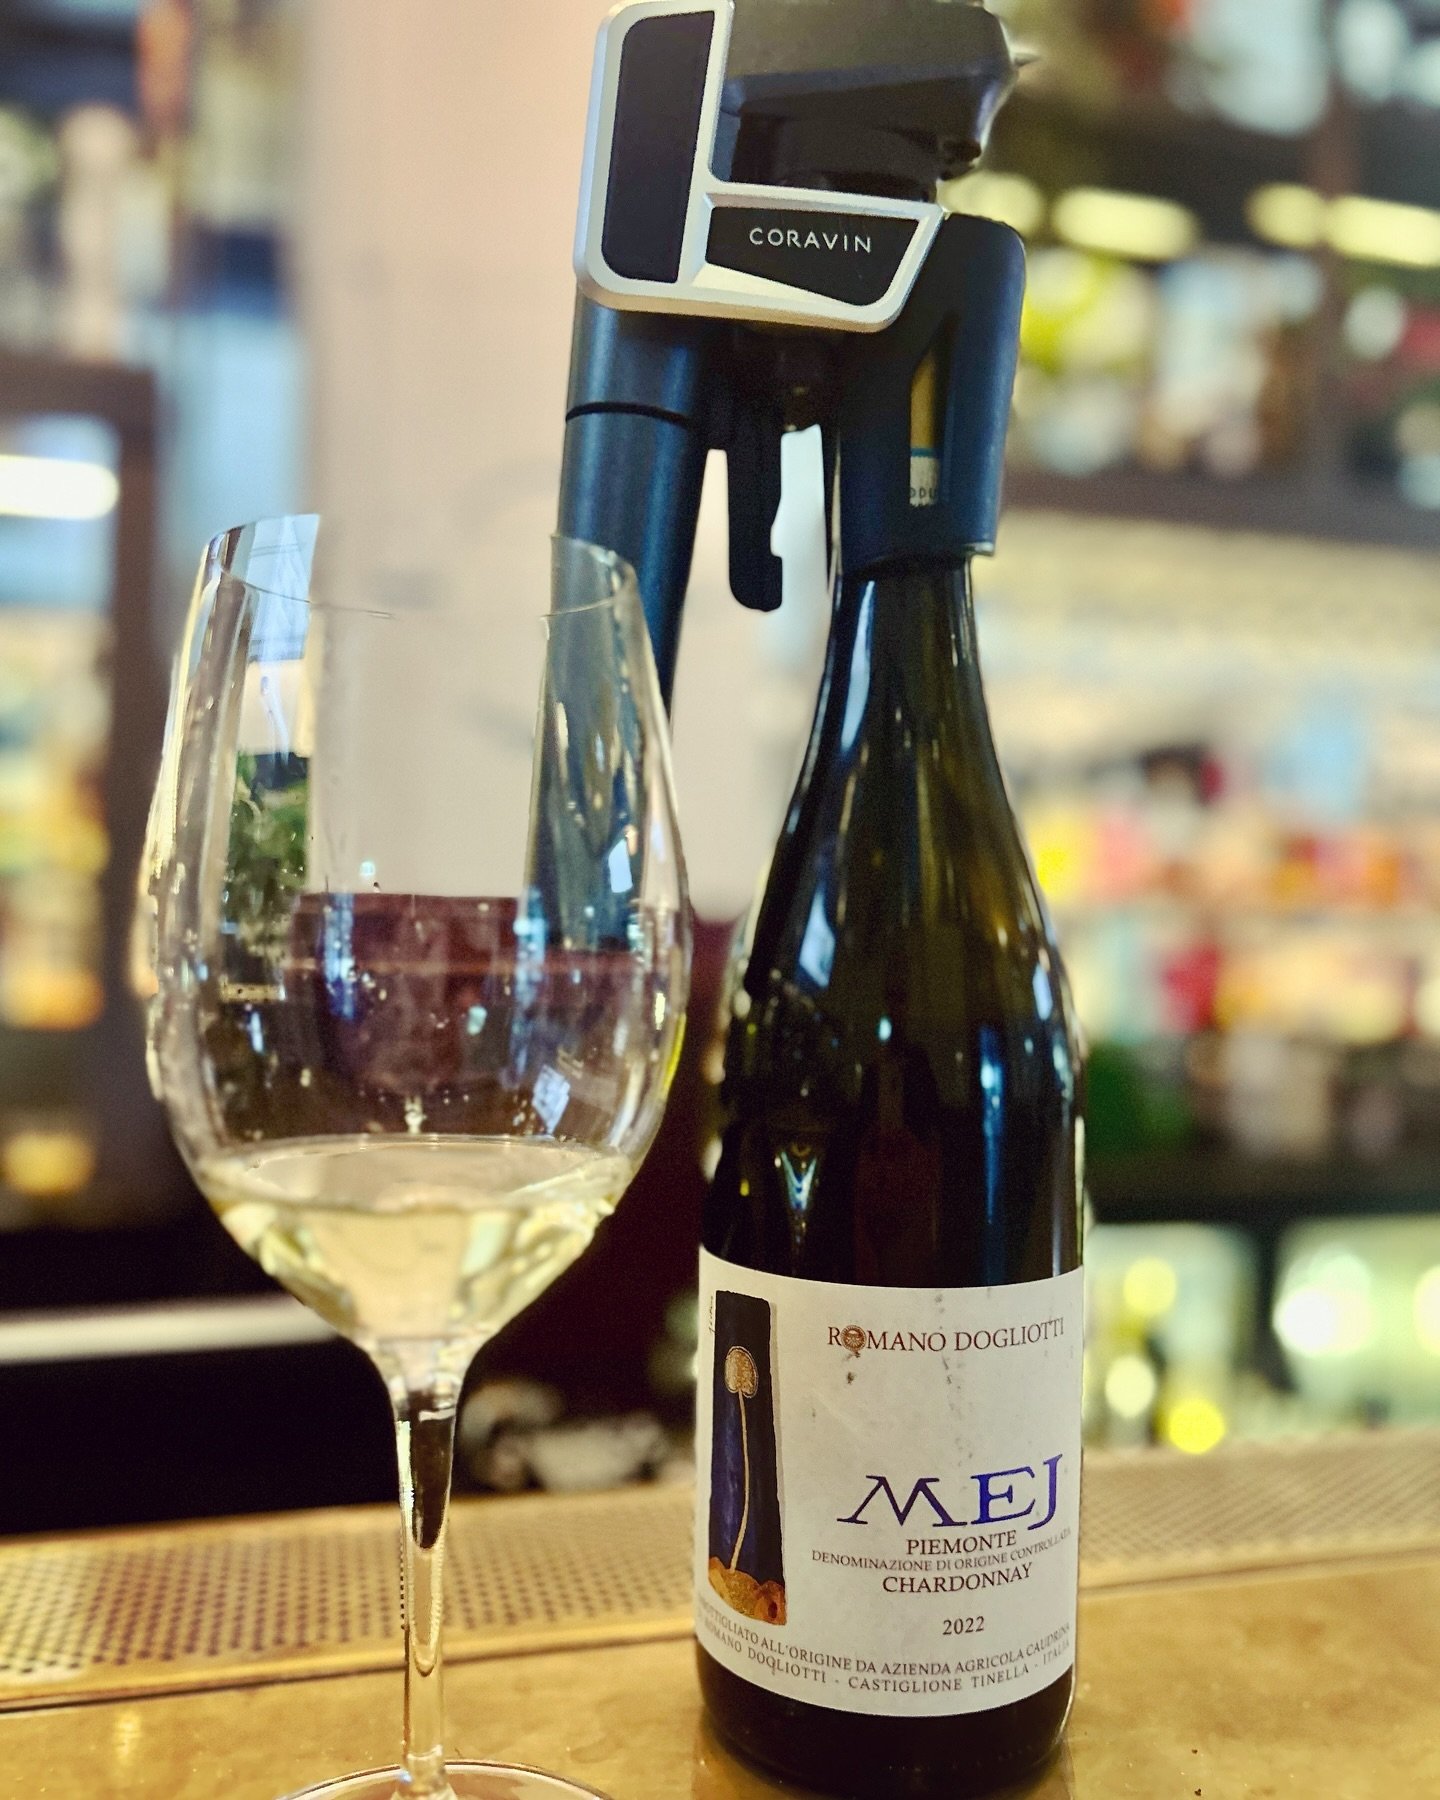 Dogliotti Mej&rsquo; 2022 Piemonte DOC Chardonnay - so hot right now at some of Perth&rsquo;s best wine bar&rsquo;s &amp; restaurants! 

Chardonnay grown in Piemonte has great character and a style all its own. Marco Dogliotti grows about one hectare